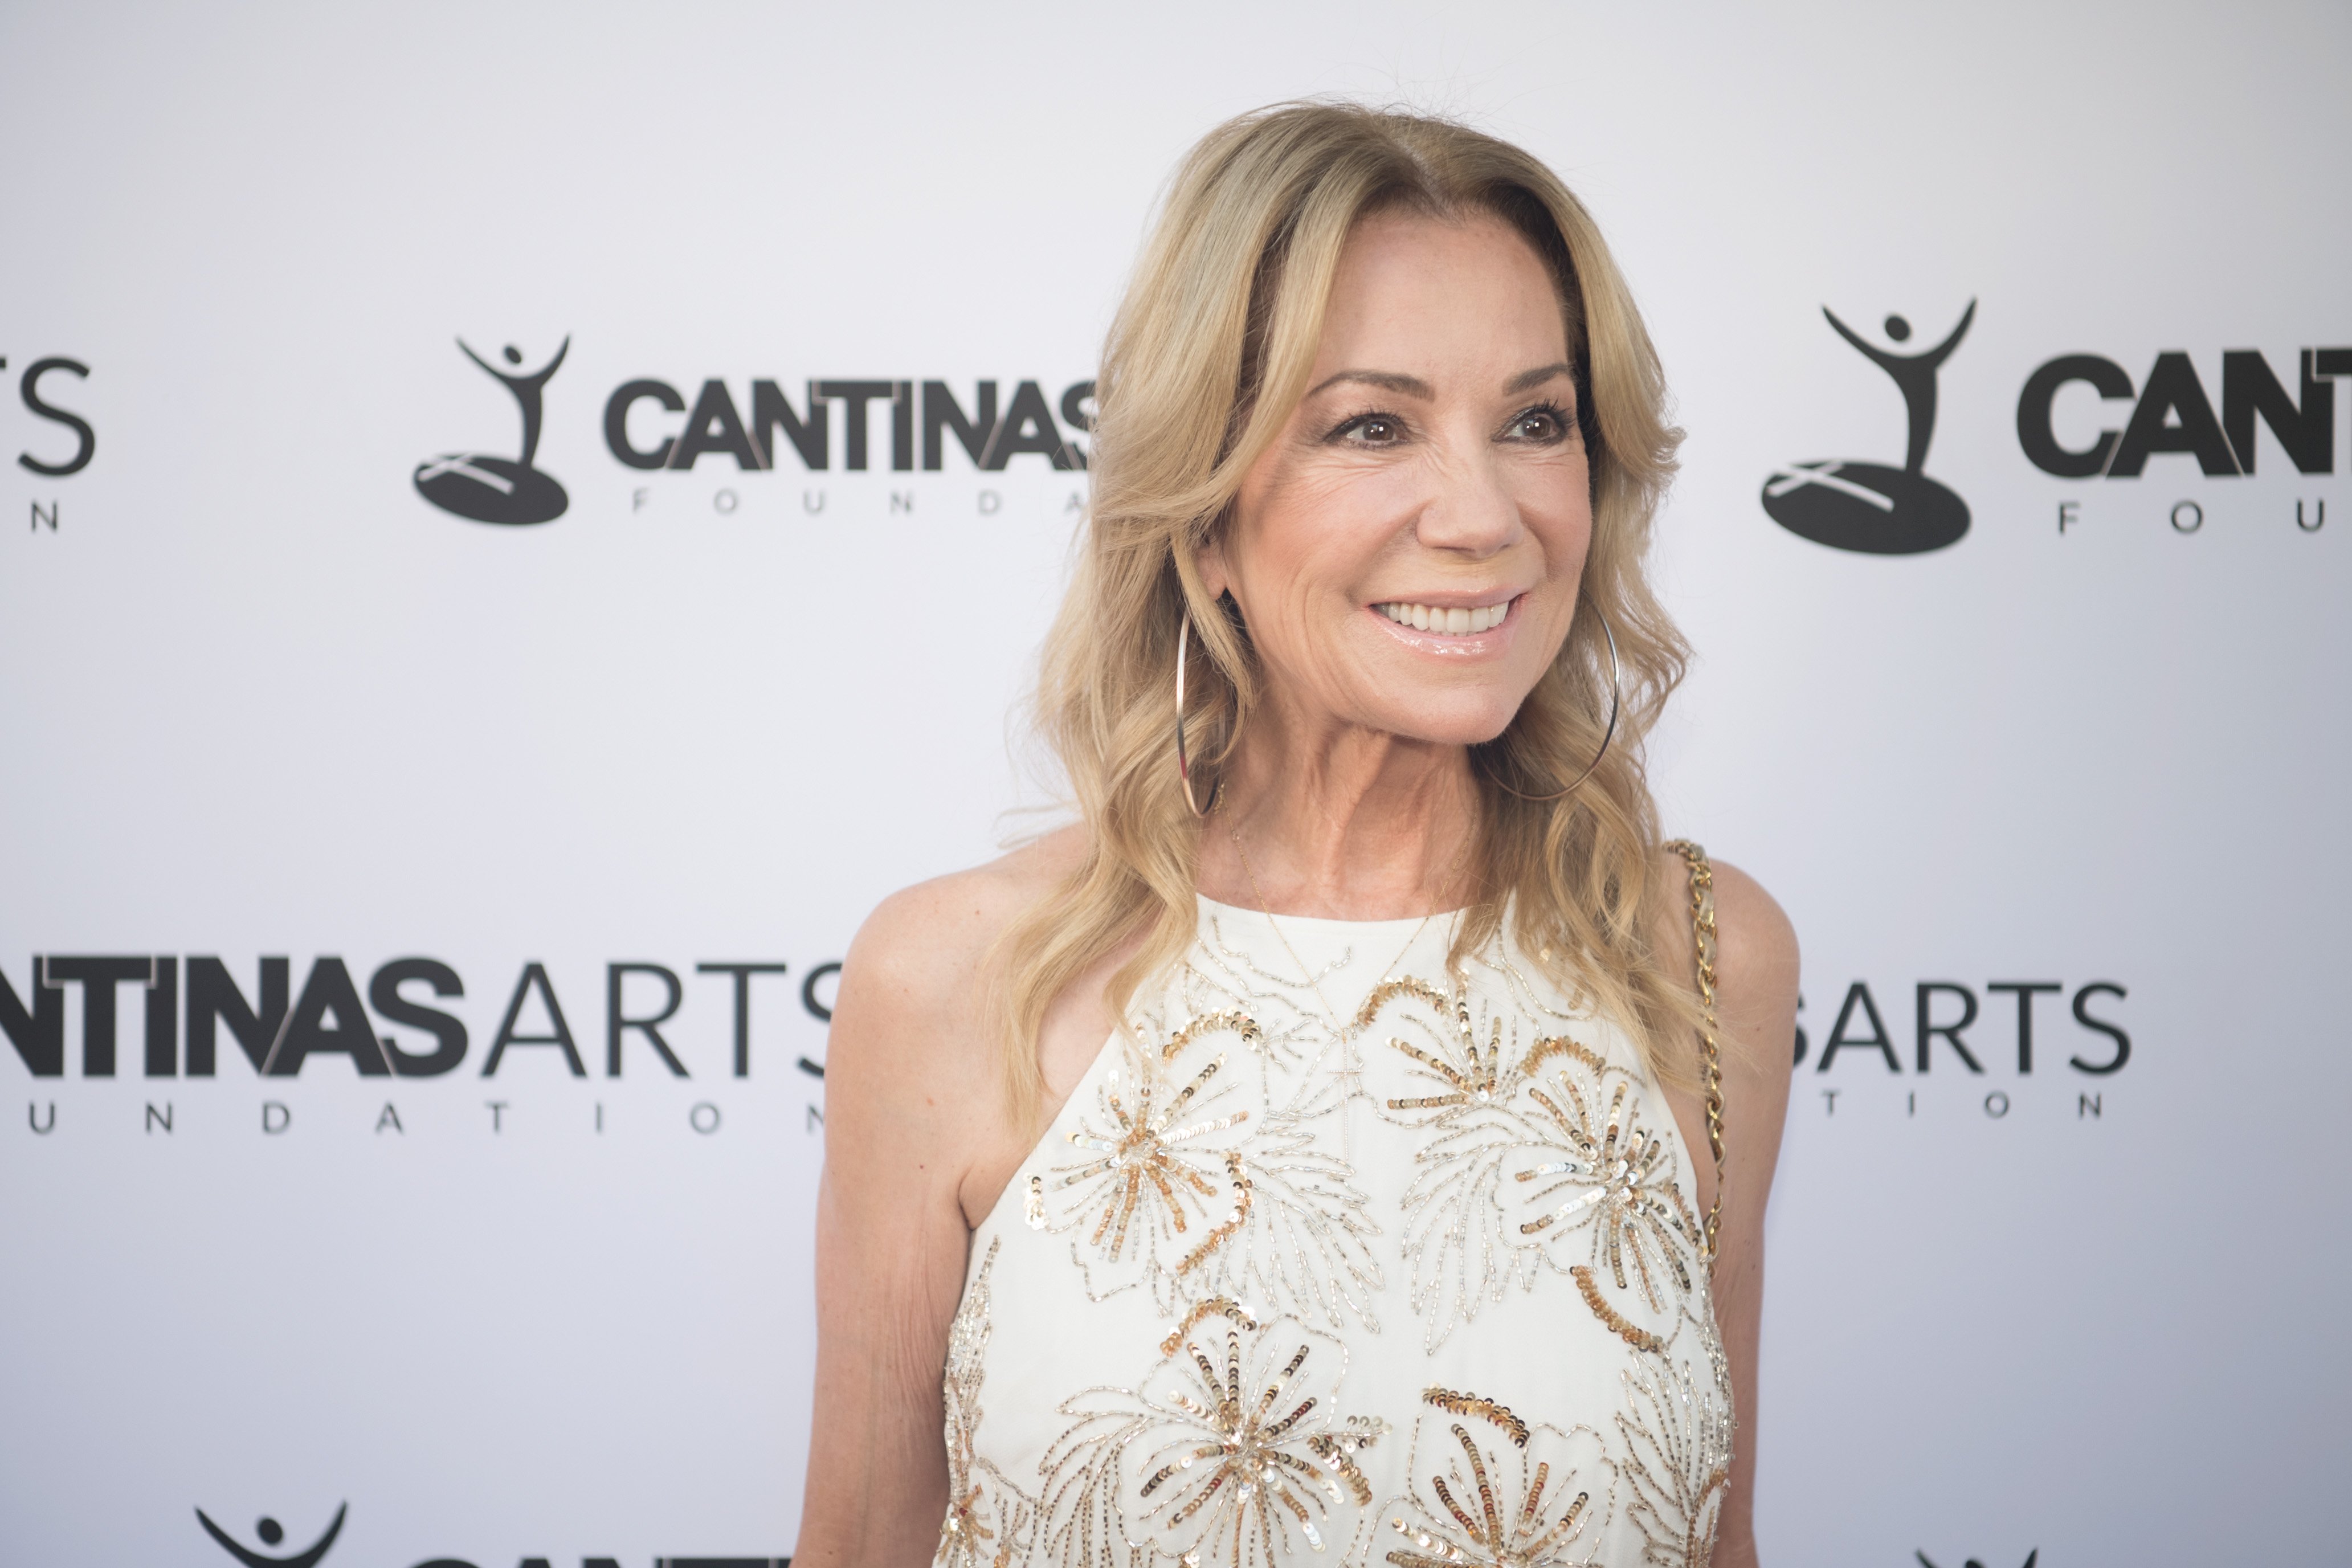  Kathie Lee Gifford arrives at The Cantinas Arts Foundation COTA Celebration of the Arts on September 15, 2018 | Photo: GettyImages